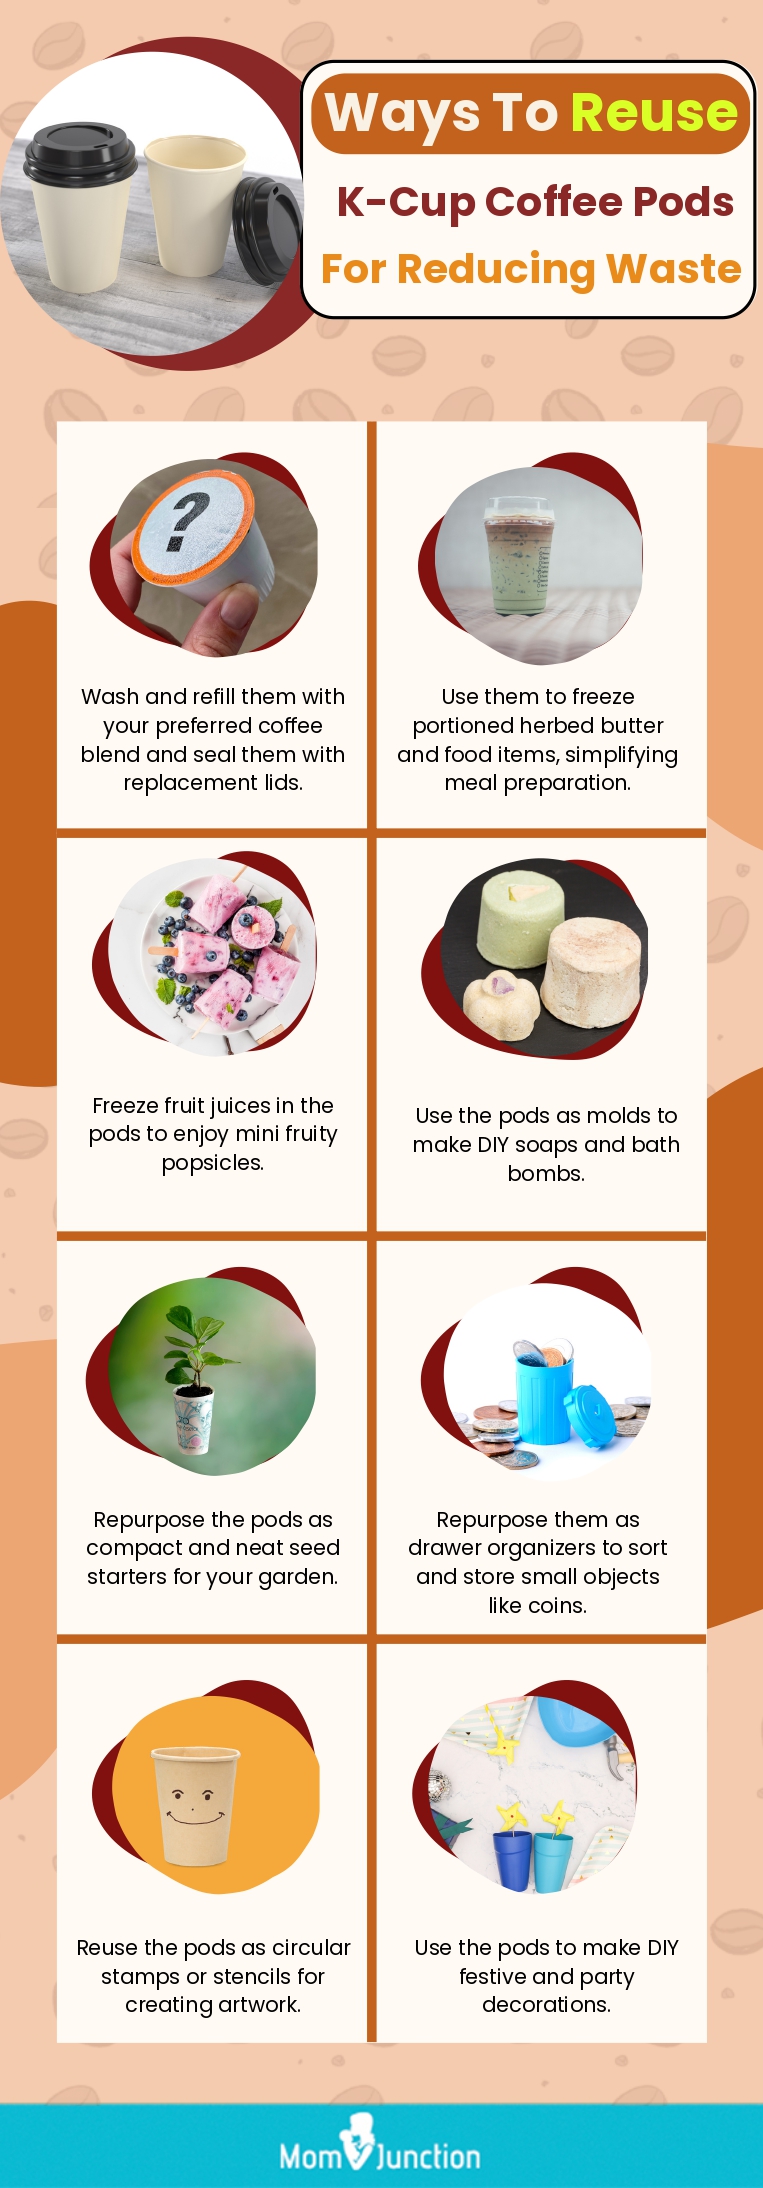 Ways To Reuse K-Cup Coffee Pods For Reducing Waste (infographic)